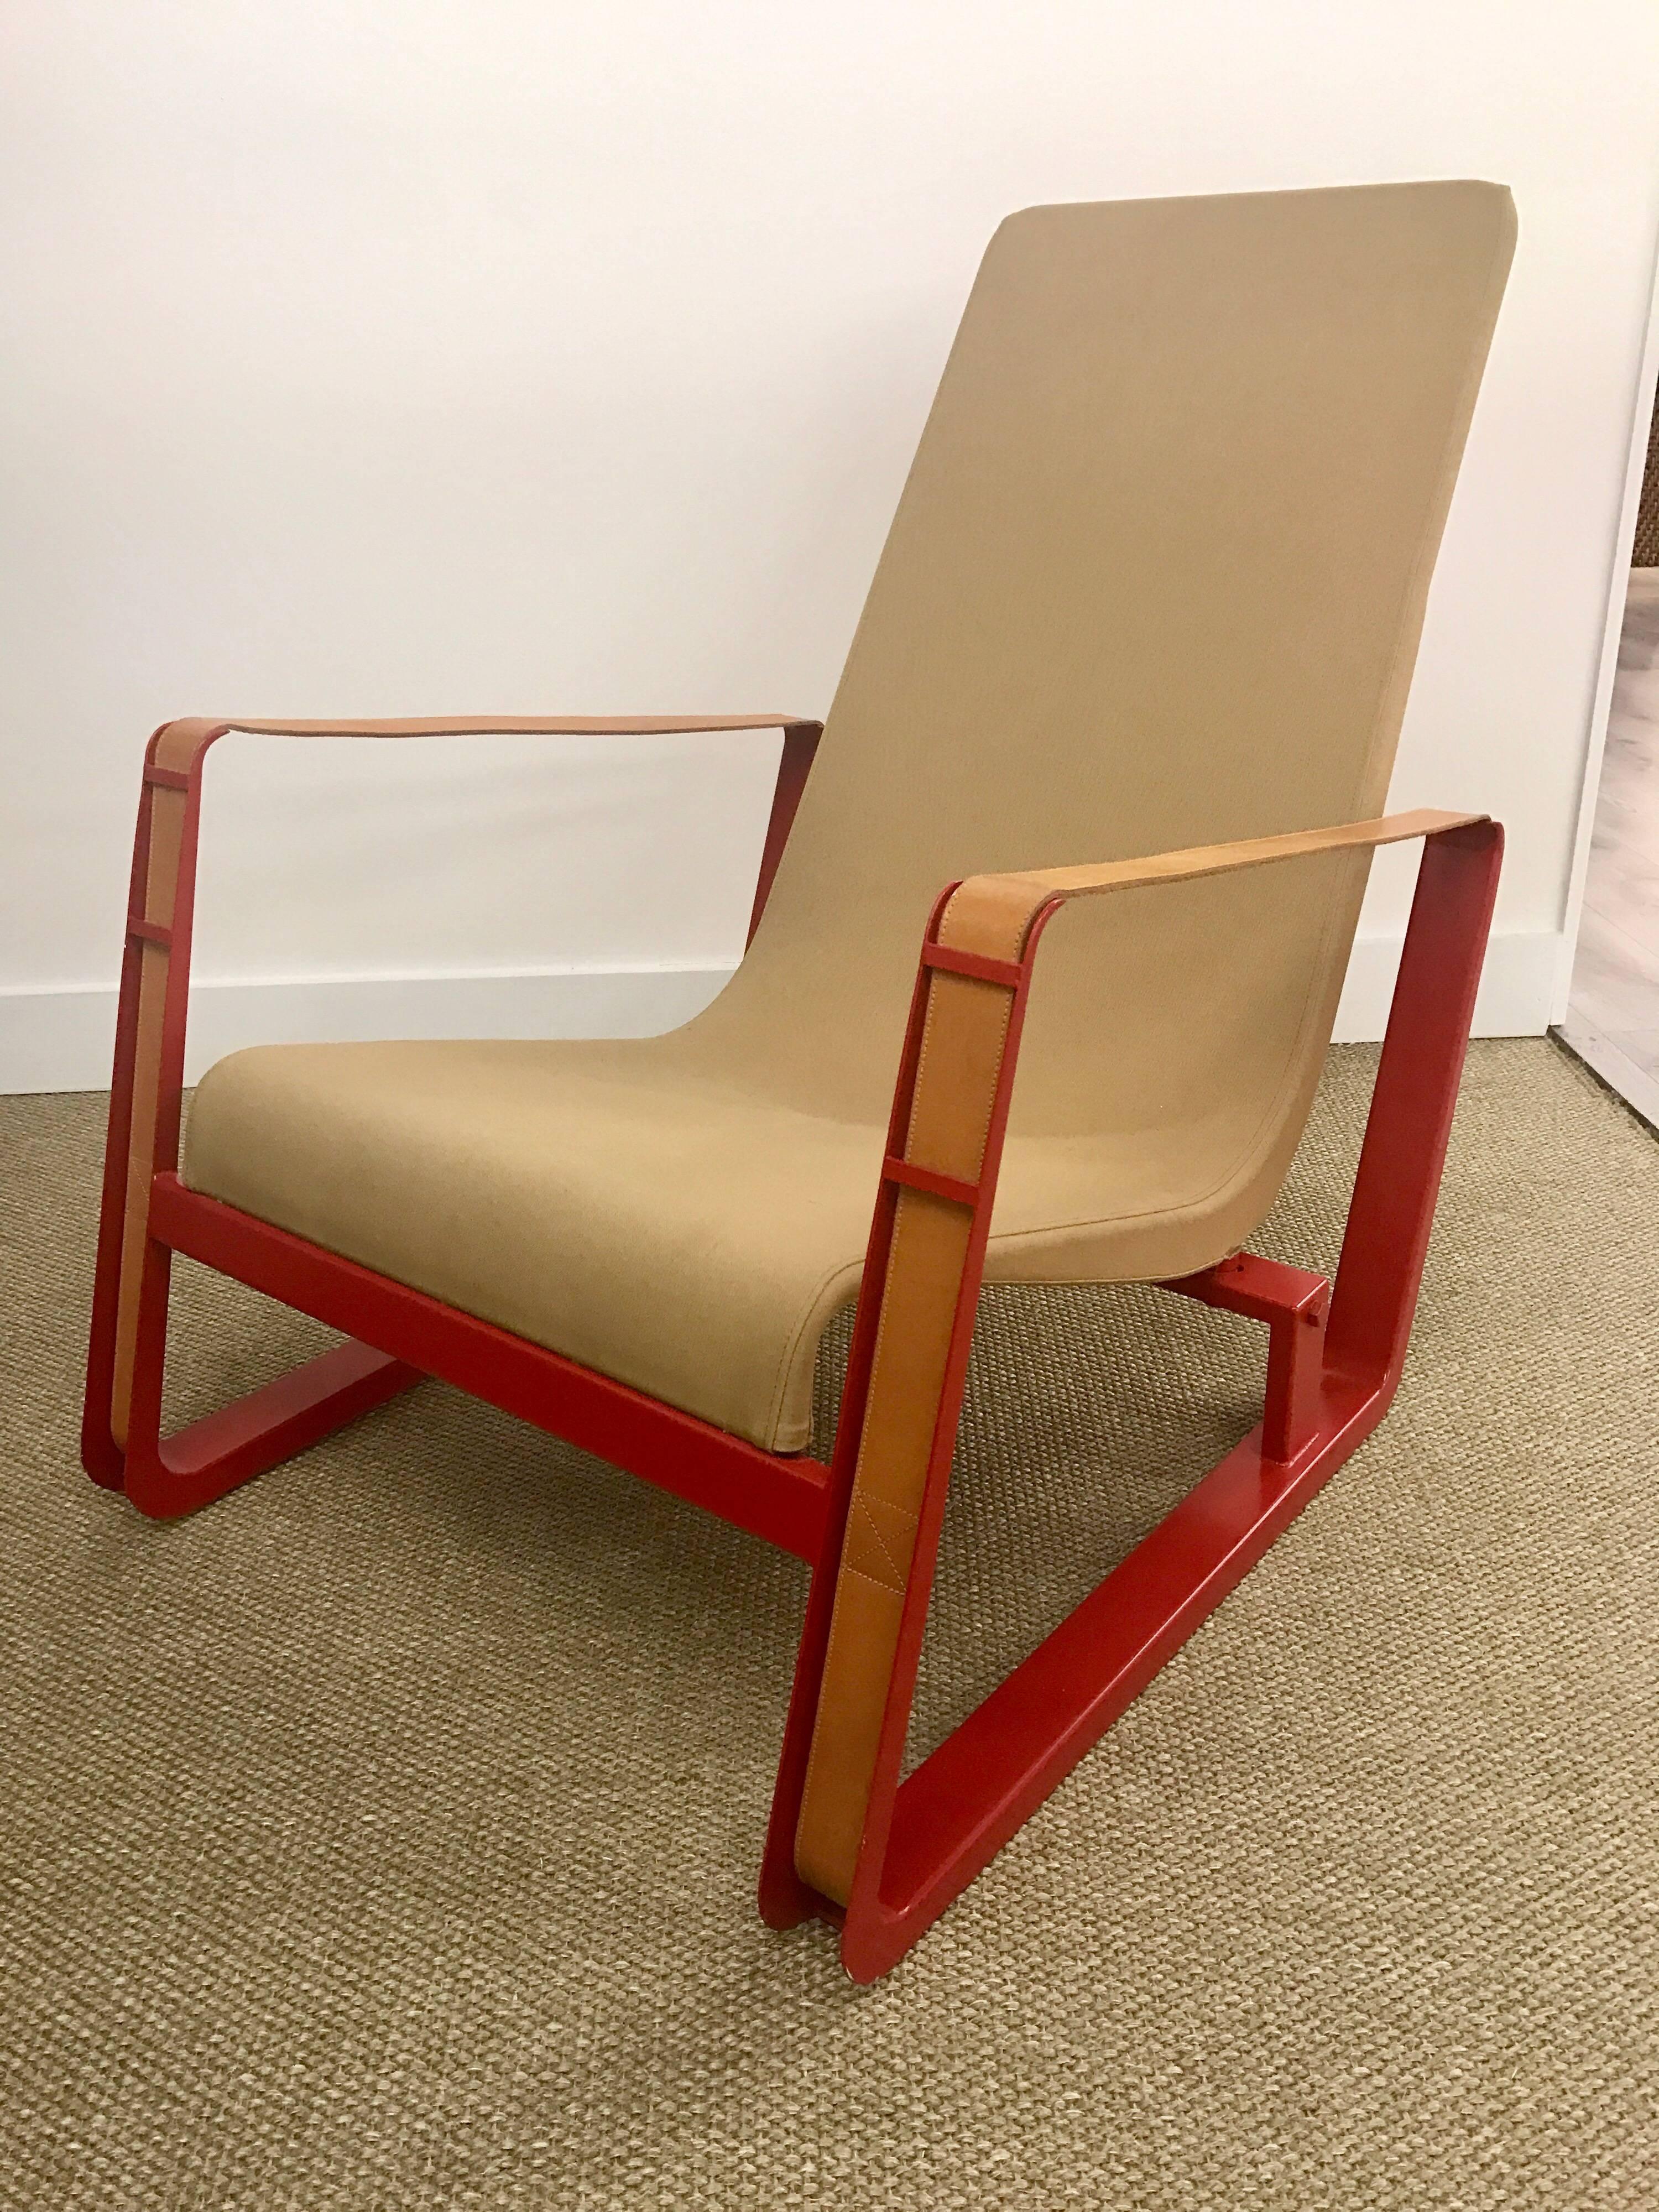 This pair of Jean Prouve Cite lounge chairs for Vitra are low and comfortable chairs and upholstered in canvas with a molded sheet steel, powder-coated in Japanese red. Amazingly beautiful and sexy leather arm straps that attach in back by a buckle.